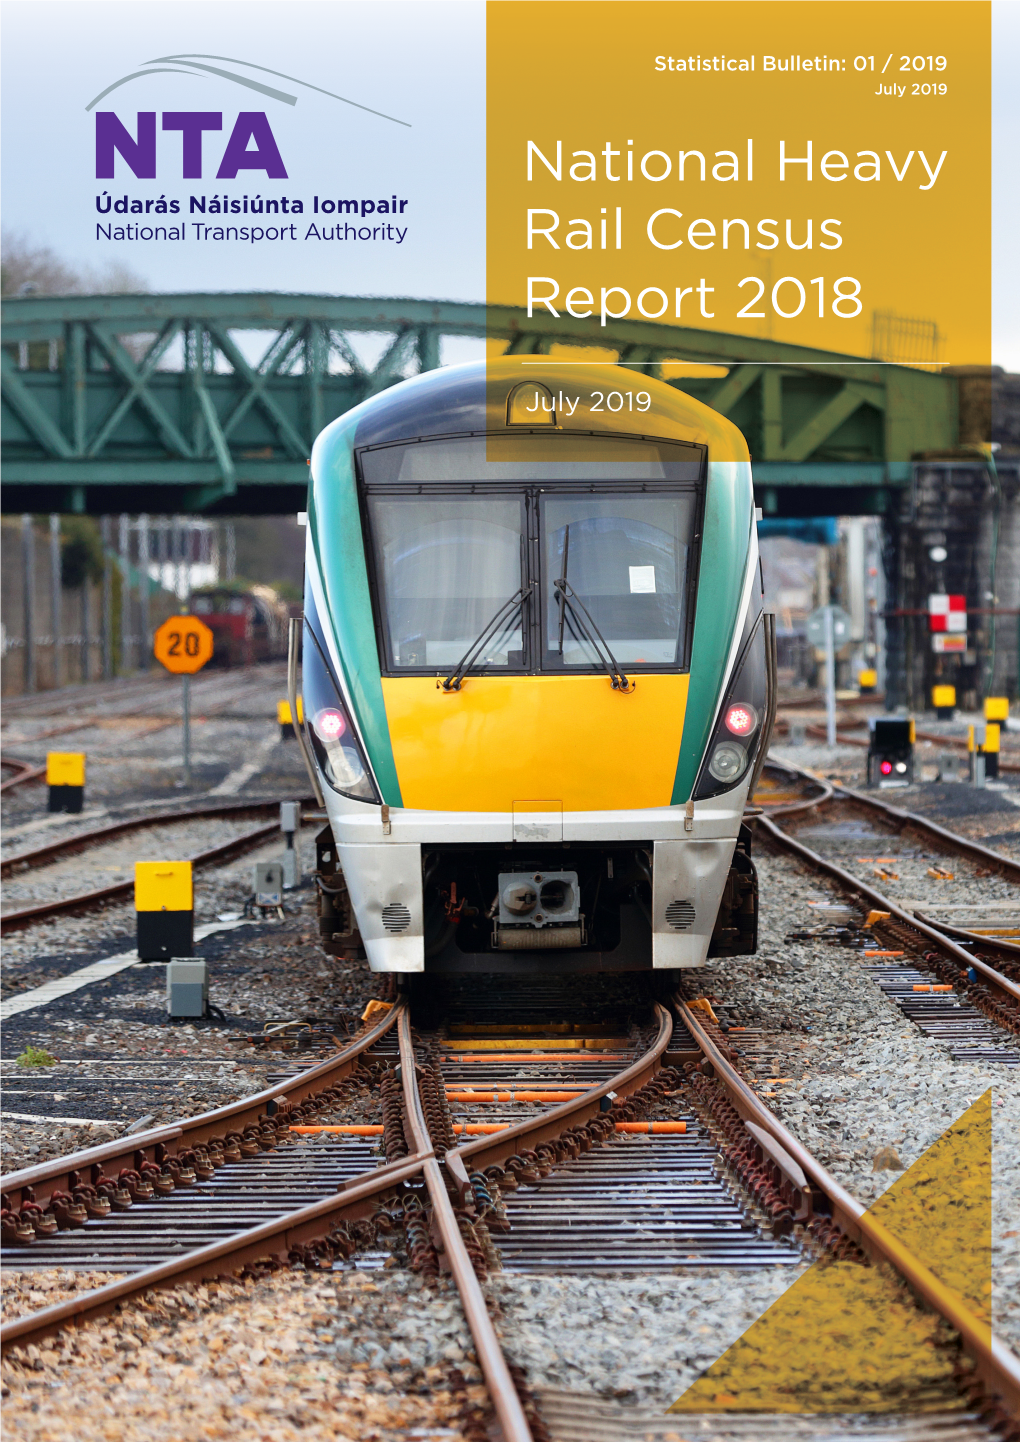 National Heavy Rail Census Report 2018